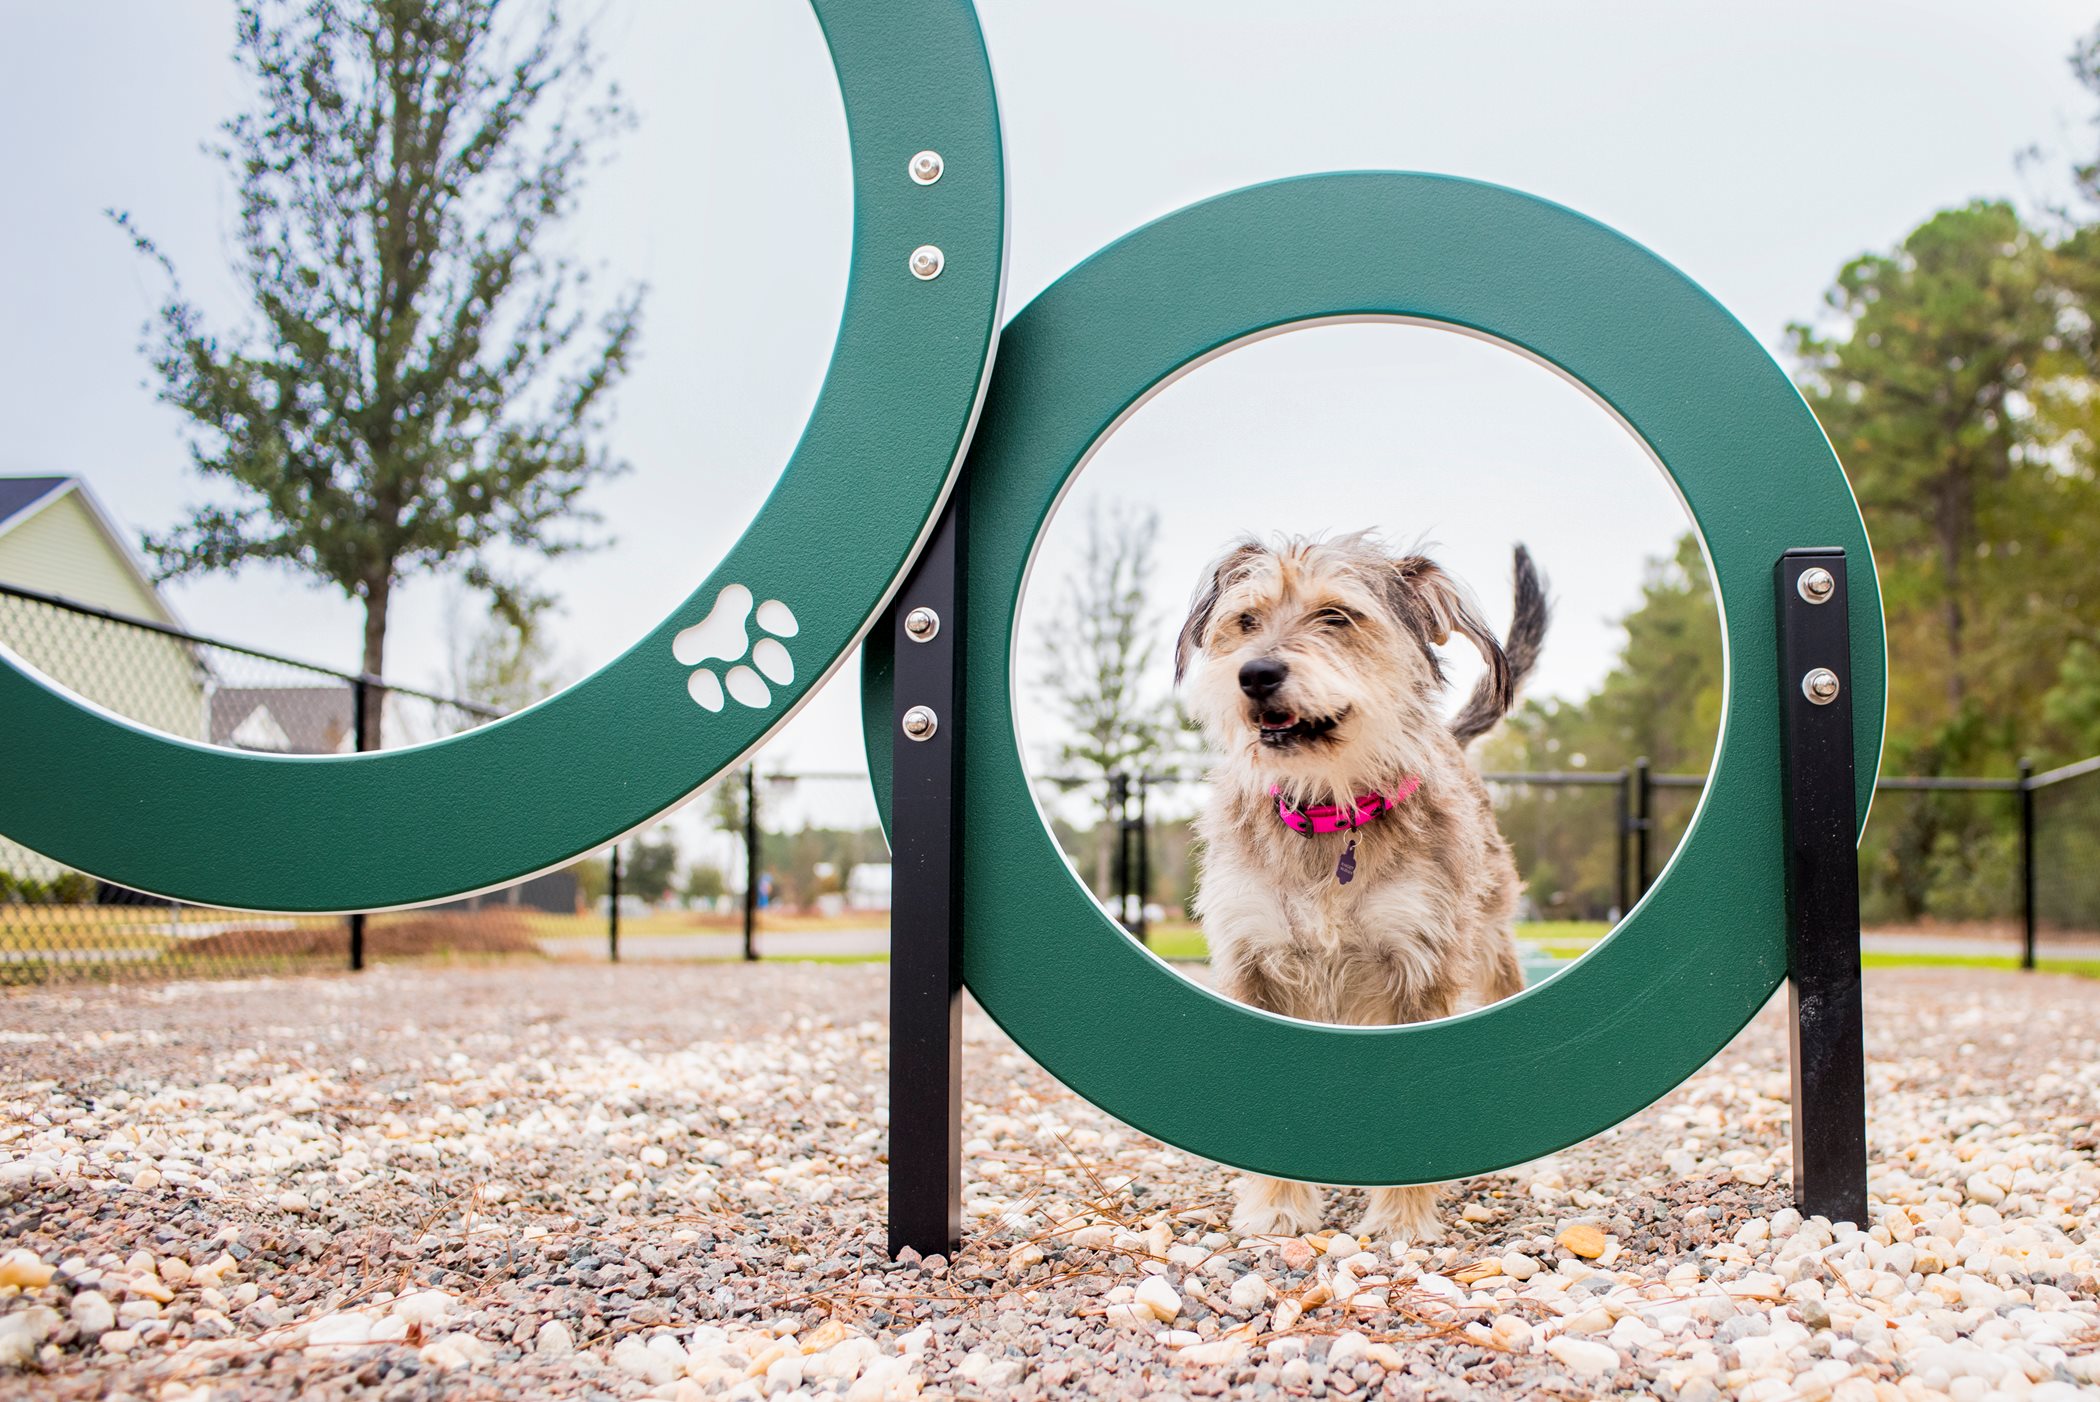 Dog park for your furry friends